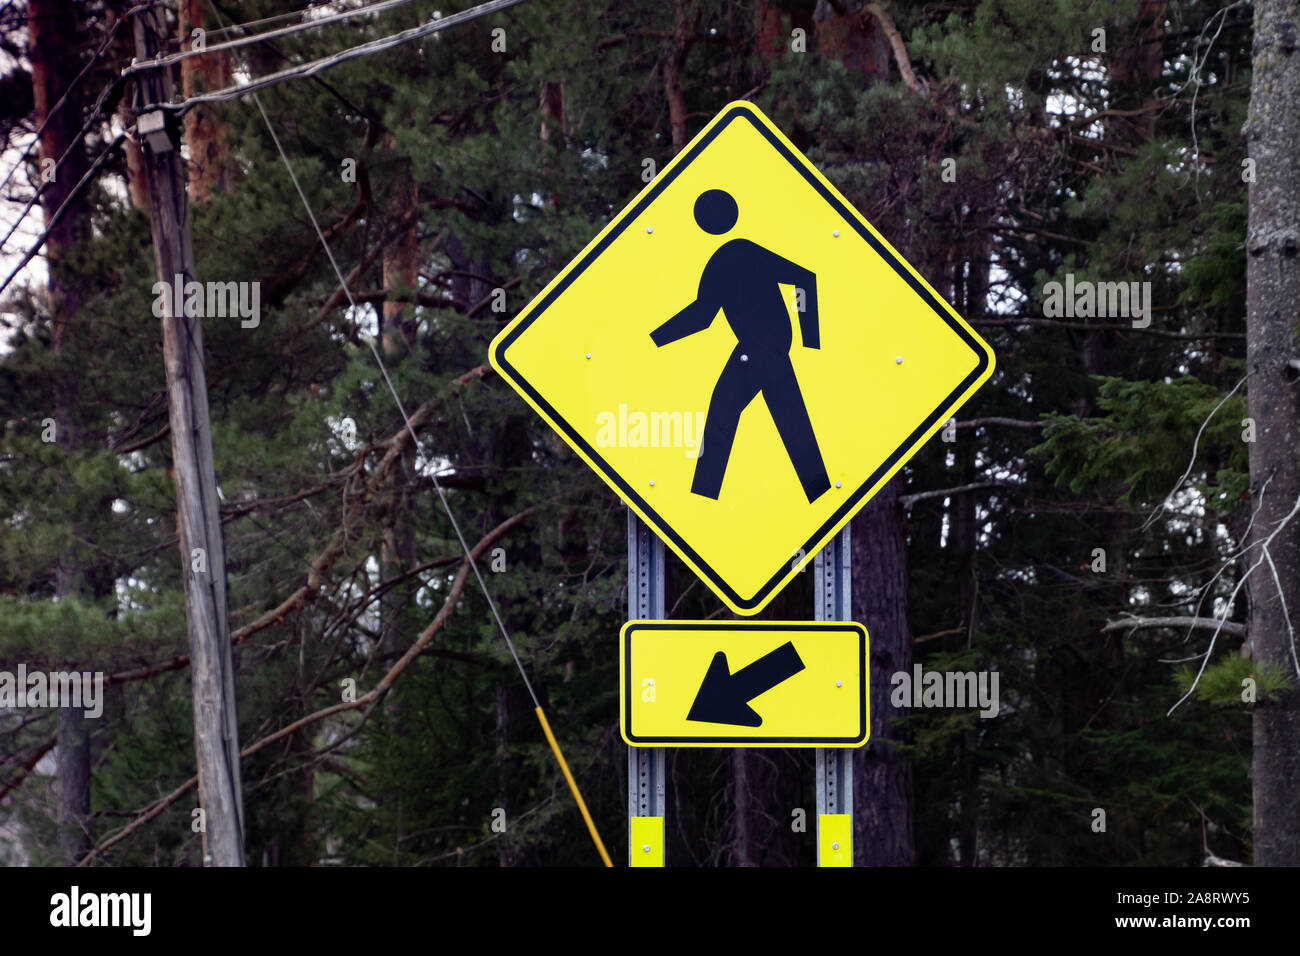 A bright yellow pedestrian crossing traffic sign with a dark green evergreen tree background in Speculator, NY USA  warning motorists of a crossing. Stock Photo